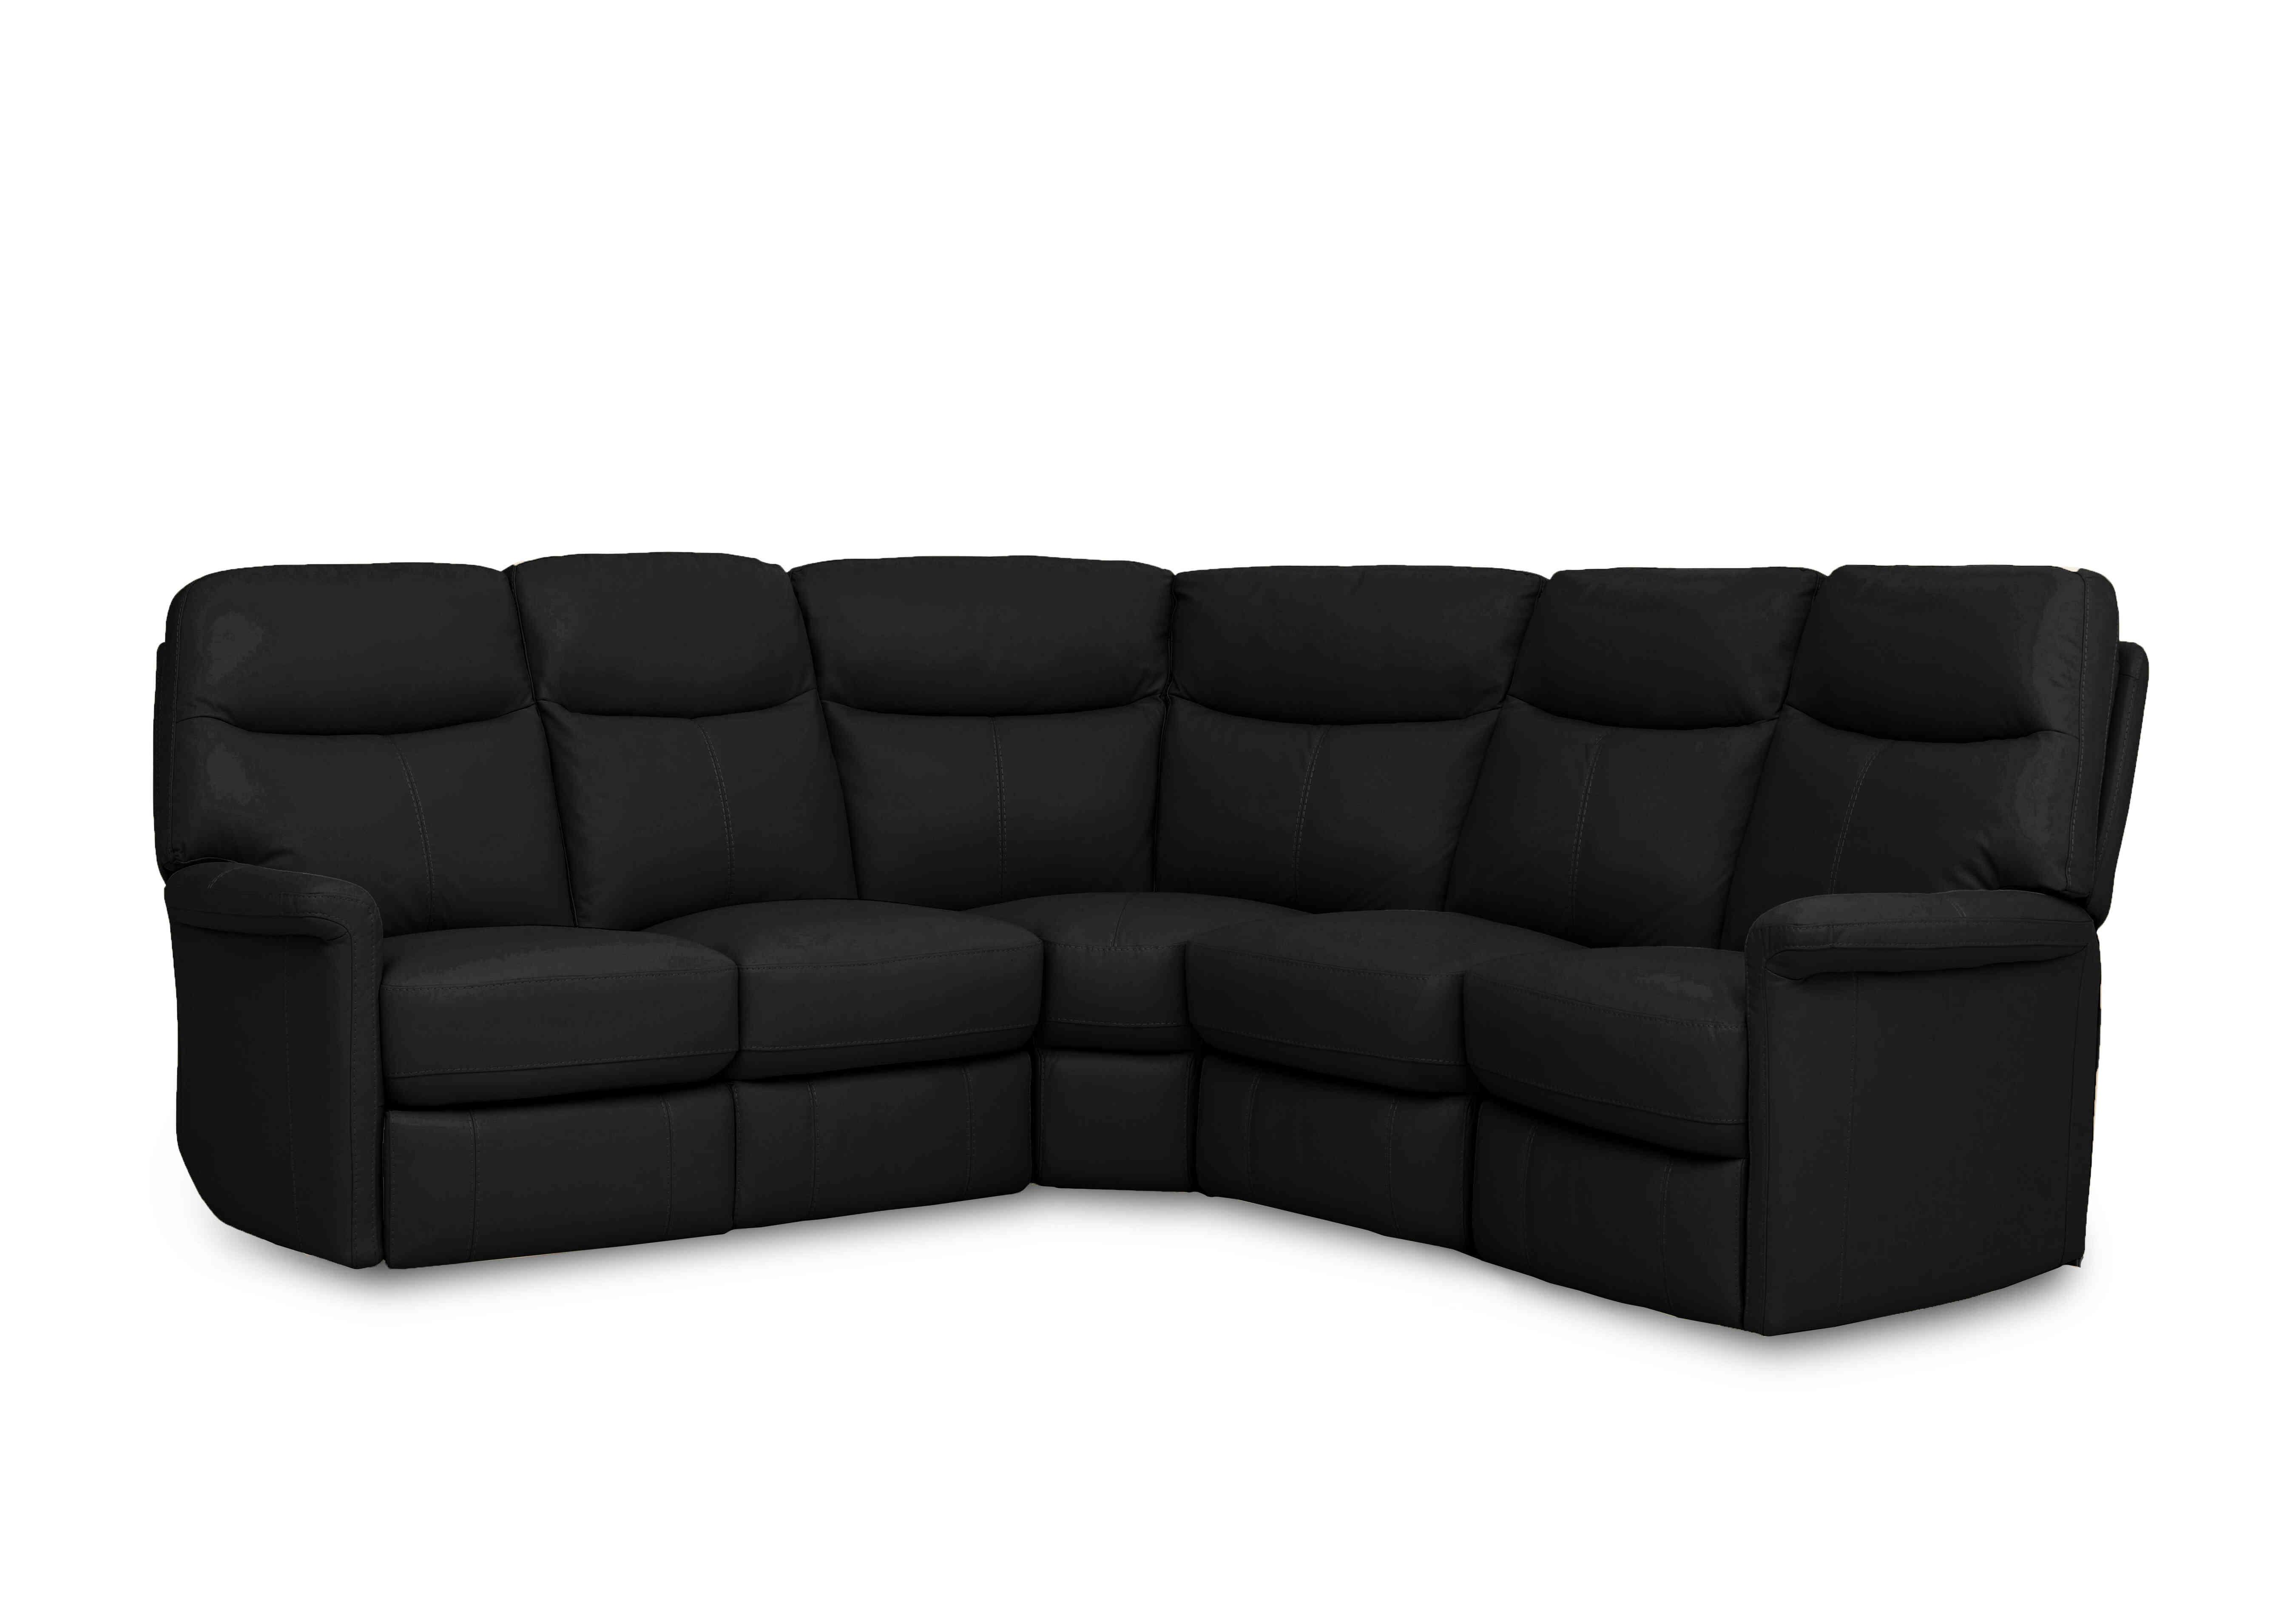 Compact Collection Lille Large Leather Corner Sofa in Bv-3500 Classic Black on Furniture Village